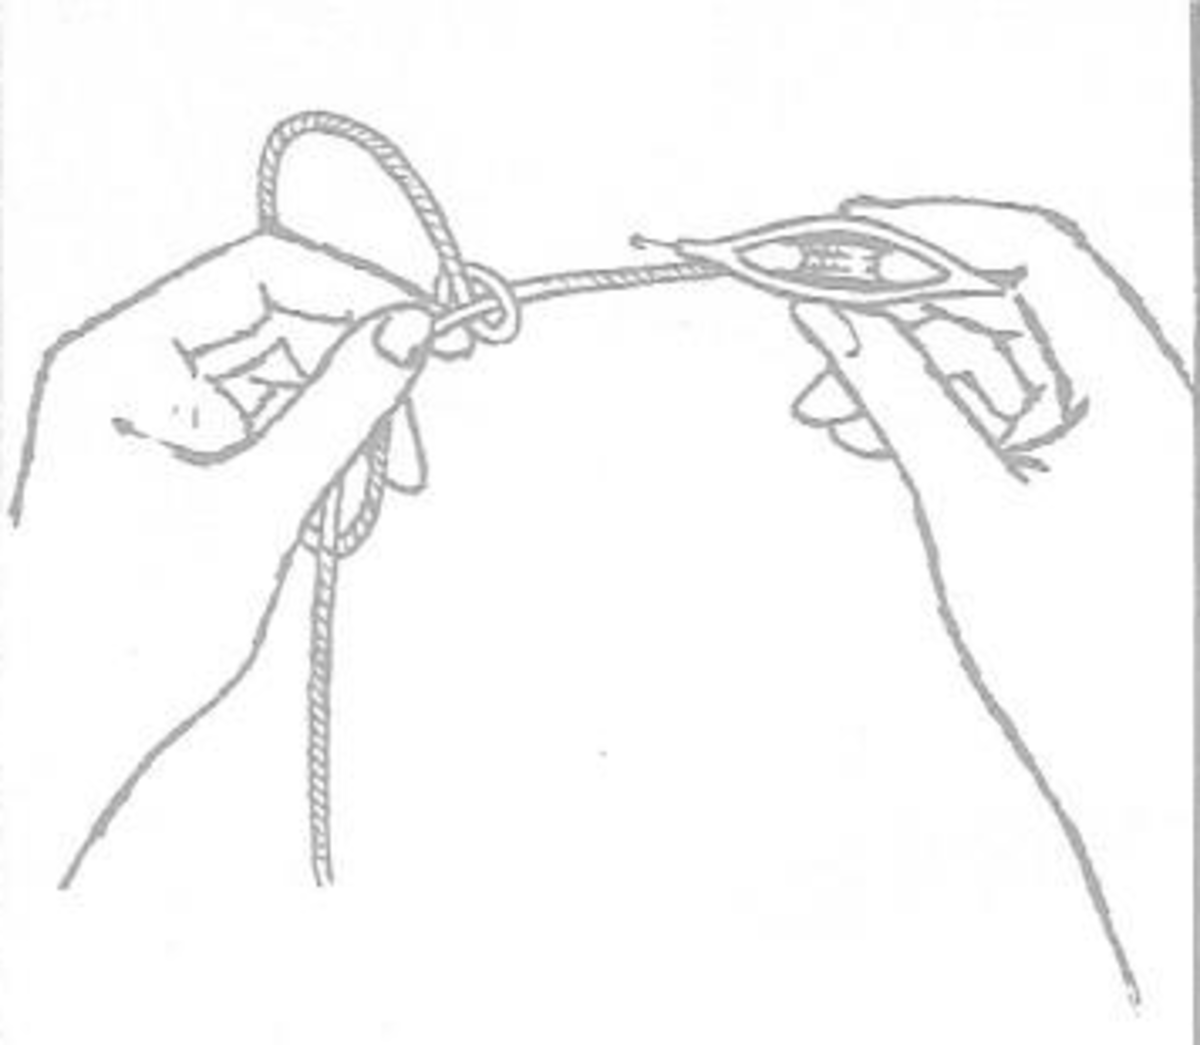 Figure 5 - Drop the Thread from the Small Finger of the Right Hand and Pull the Shuttle Tight.